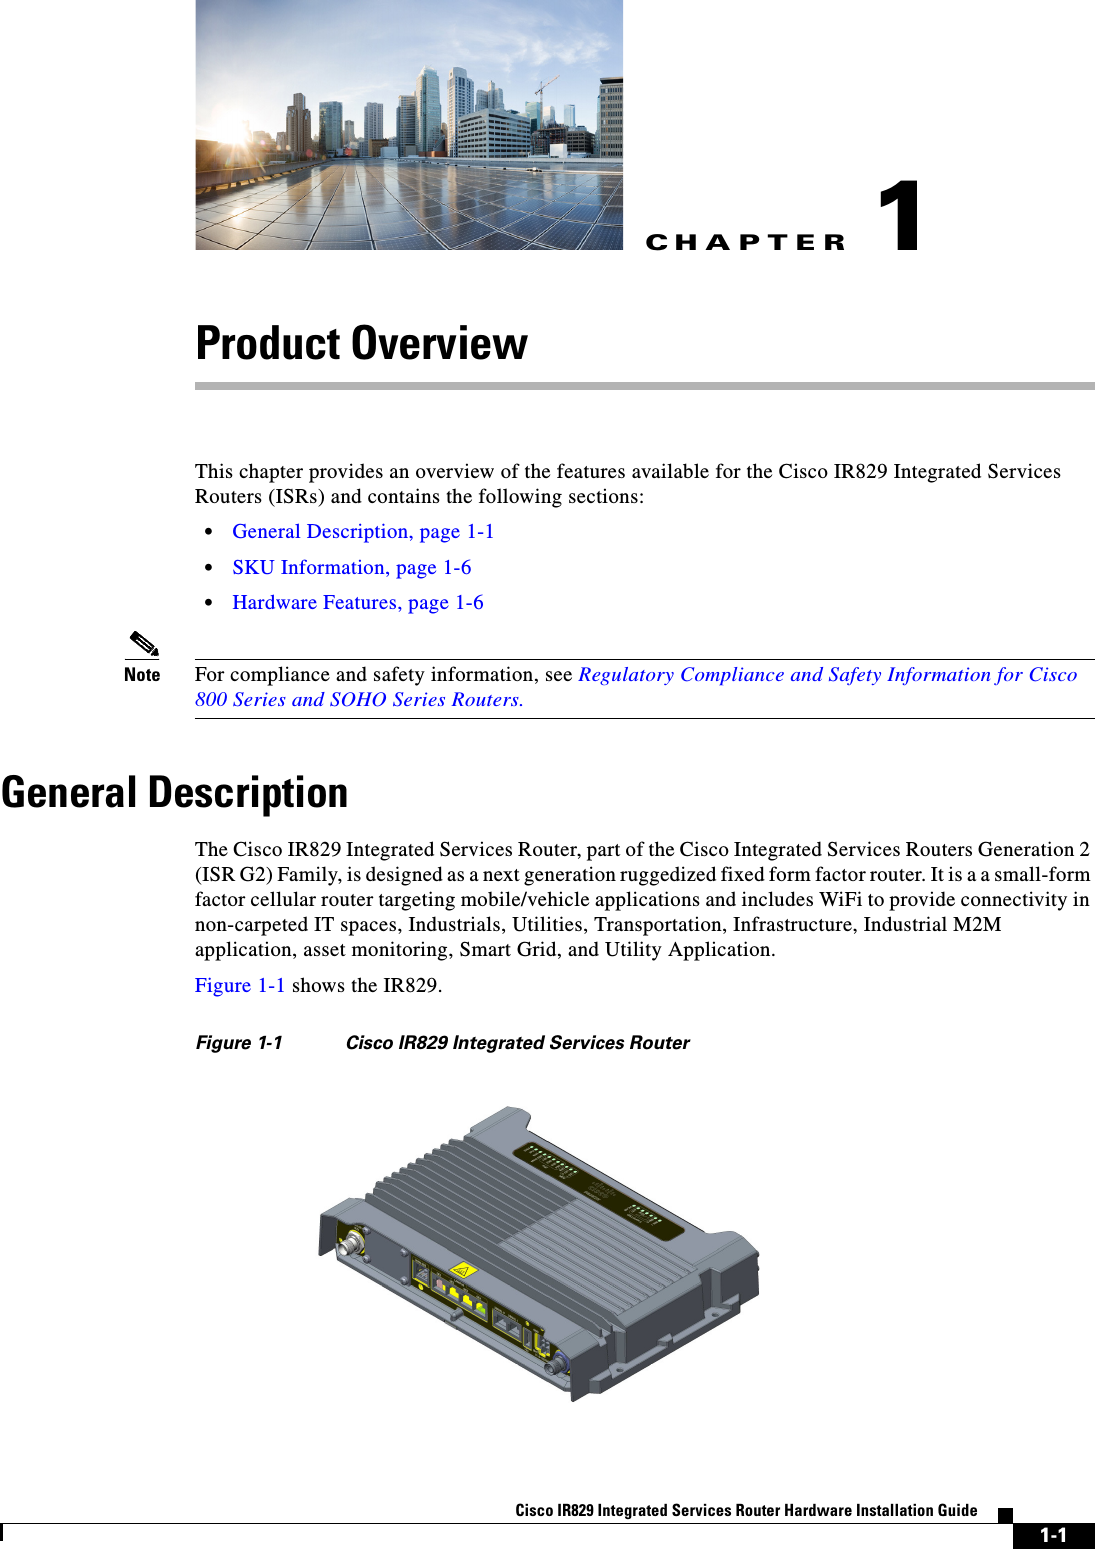 CHAPTER1-1Cisco IR829 Integrated Services Router Hardware Installation Guide1Product OverviewThis chapter provides an overview of the features available for the Cisco IR829 Integrated Services Routers (ISRs) and contains the following sections:  • General Description, page 1-1  • SKU Information, page 1-6  • Hardware Features, page 1-6Note For compliance and safety information, see Regulatory Compliance and Safety Information for Cisco 800 Series and SOHO Series Routers.General DescriptionThe Cisco IR829 Integrated Services Router, part of the Cisco Integrated Services Routers Generation 2 (ISR G2) Family, is designed as a next generation ruggedized fixed form factor router. It is a a small-form factor cellular router targeting mobile/vehicle applications and includes WiFi to provide connectivity in non-carpeted IT spaces, Industrials, Utilities, Transportation, Infrastructure, Industrial M2M application, asset monitoring, Smart Grid, and Utility Application.Figure 1-1 shows the IR829.Figure 1-1 Cisco IR829 Integrated Services Router